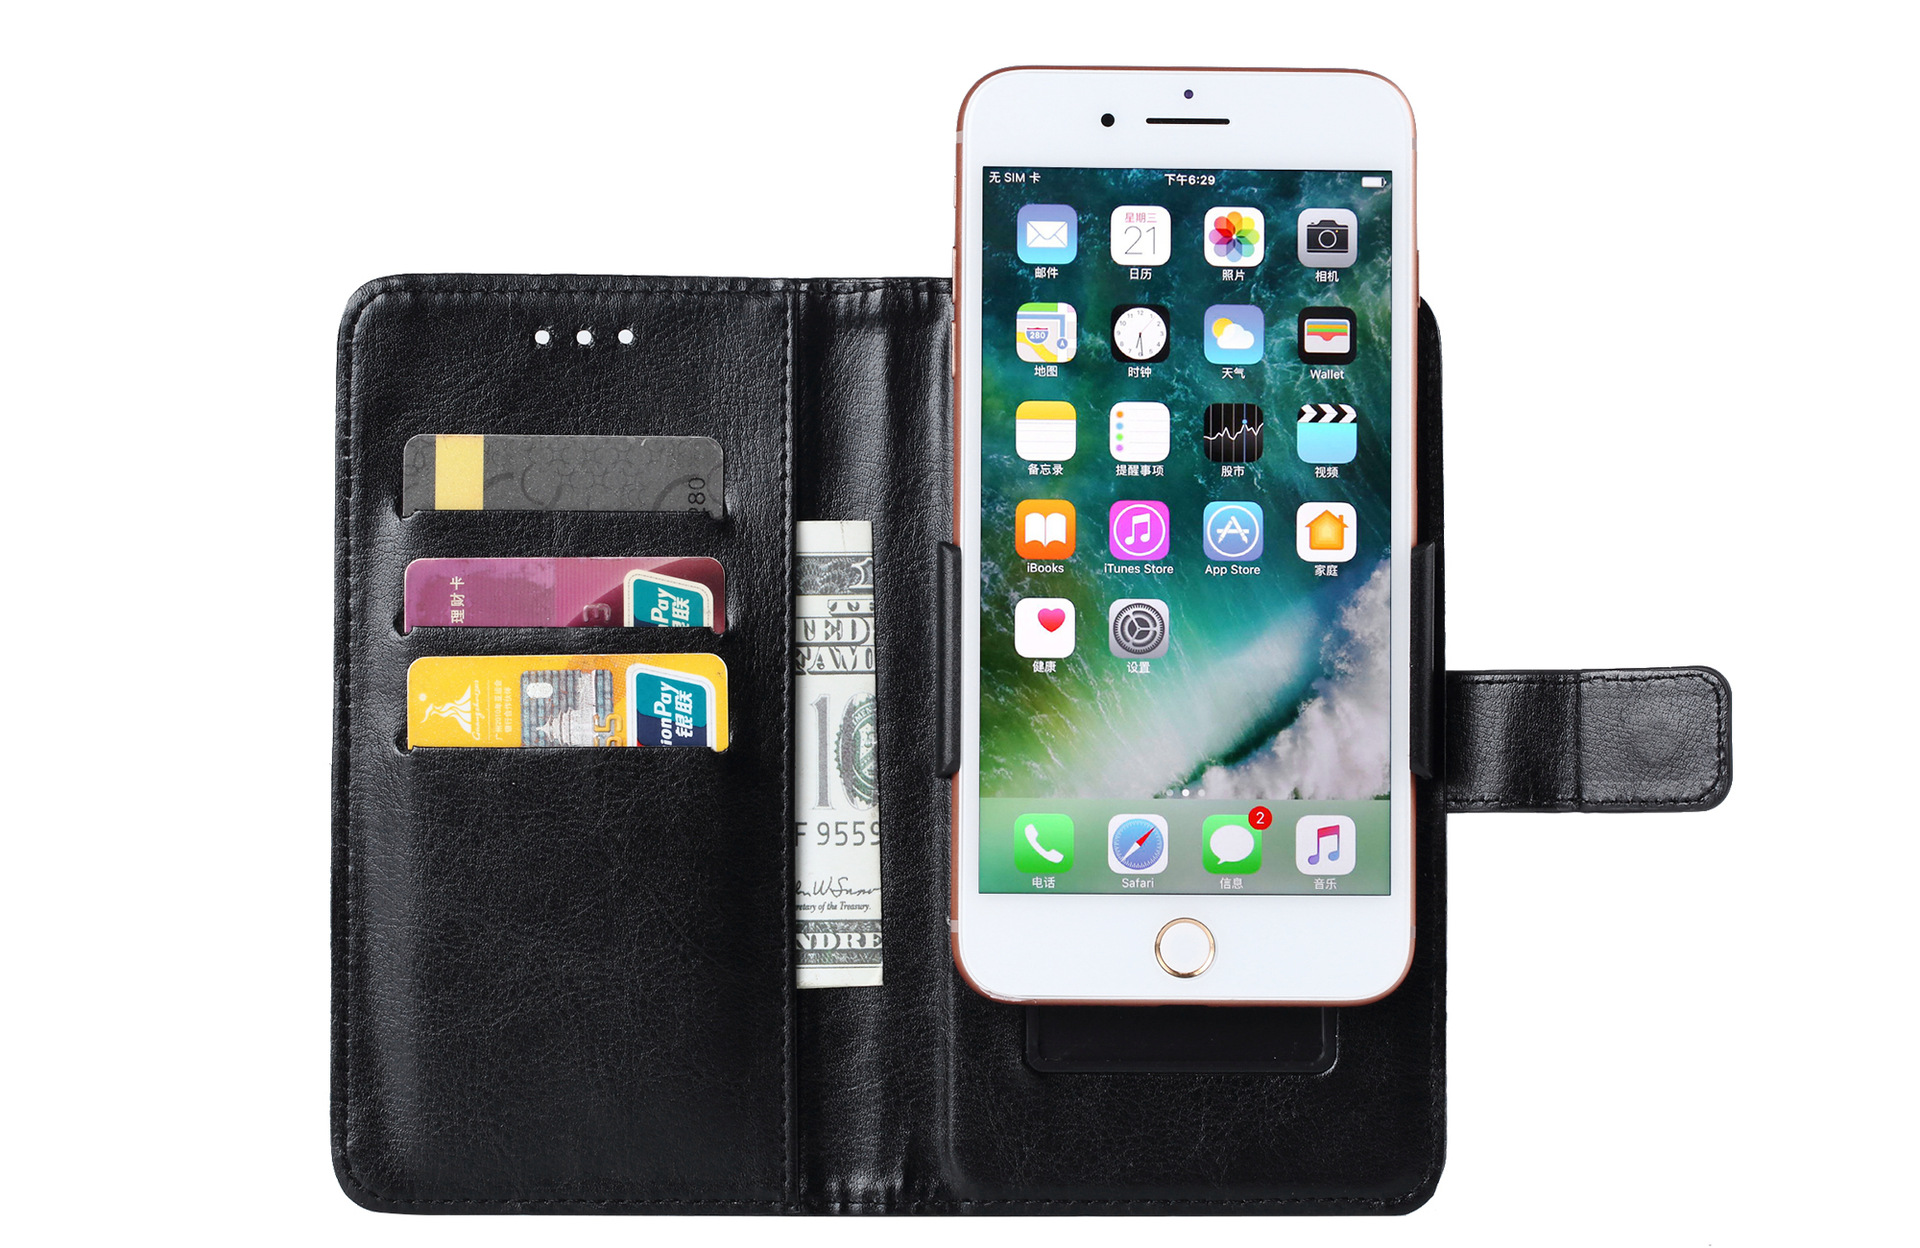 Universal Leather Case Push Up and Down Clip Clip Mobile Phone Leather Case Universal Skateboard Protective Case Left and Right Open Wallet Leather Case